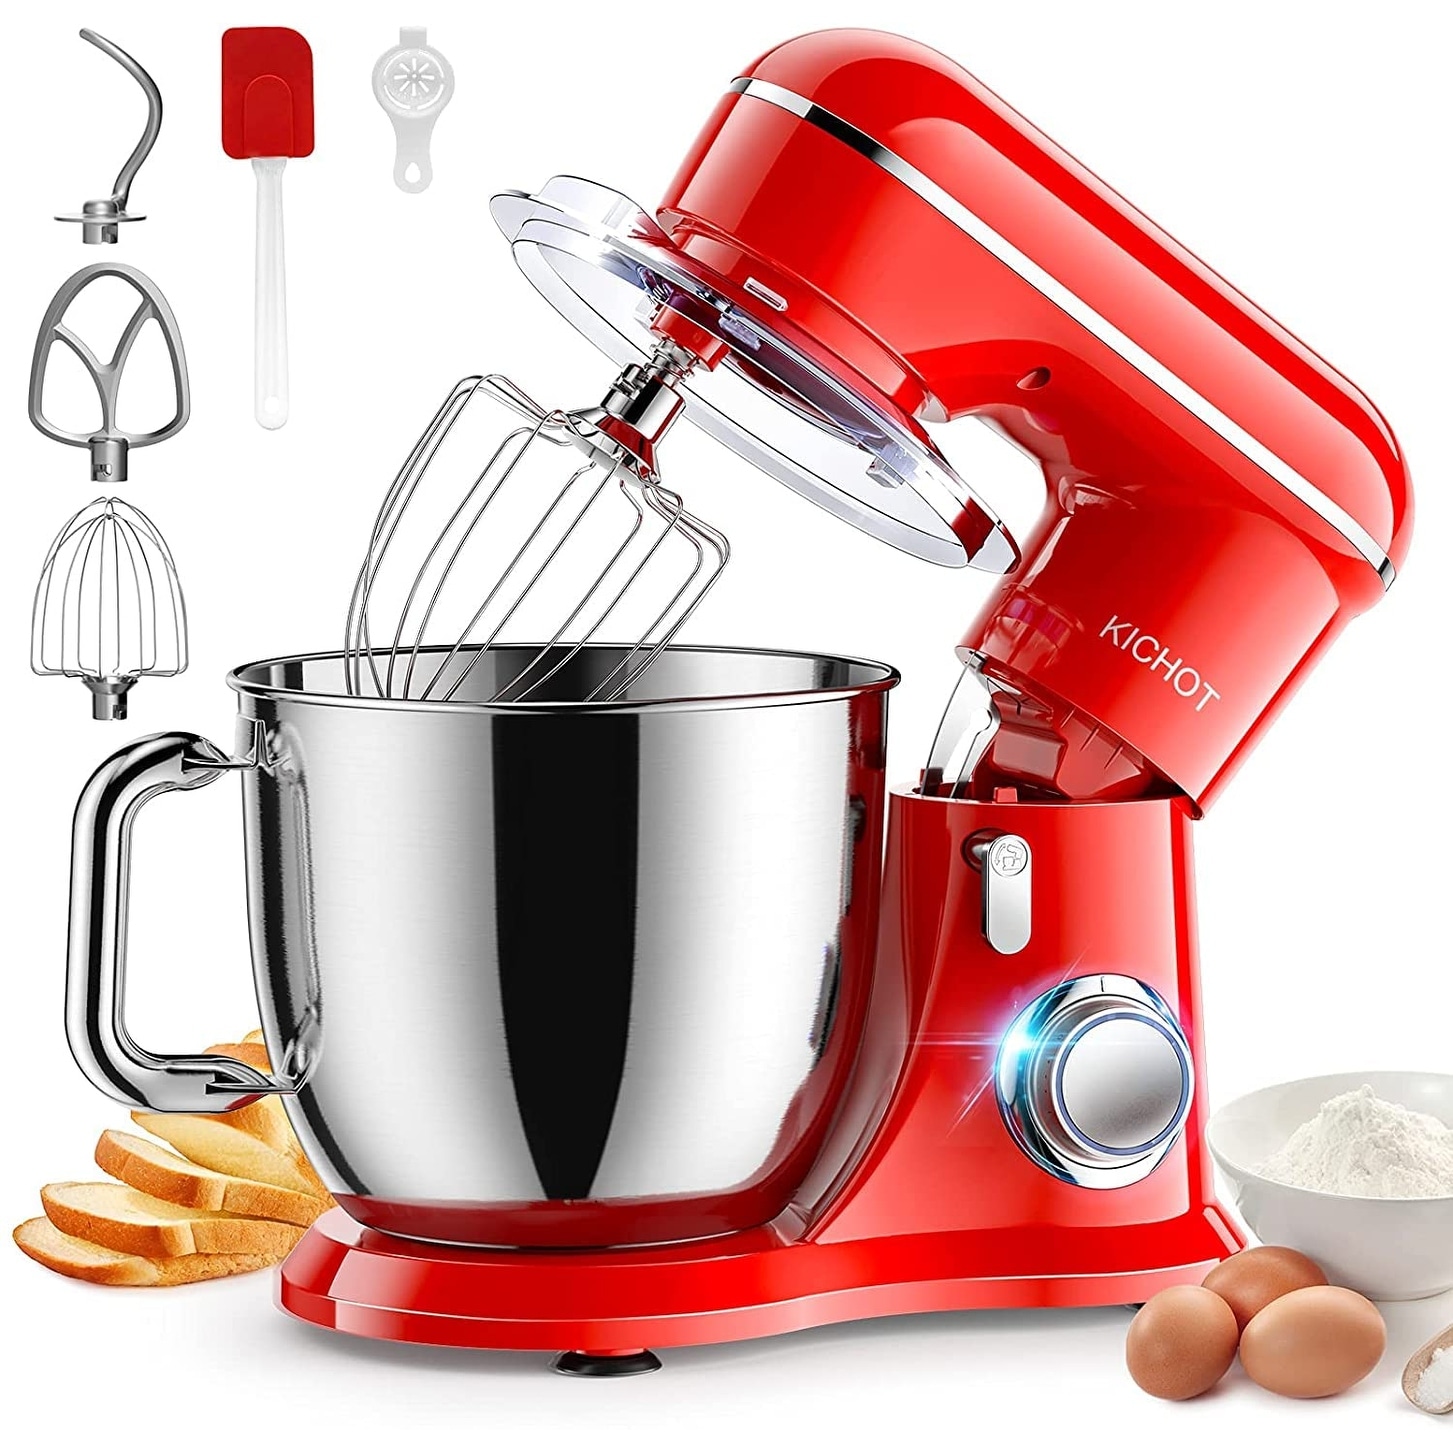 https://ak1.ostkcdn.com/images/products/is/images/direct/69b9ab128208b08f3bccae61c1b7cddb3f37c333/Tilt-Head-Cake-Mixer-Machine-with-Dough-Hook%2C-Beater%2C-Wire-Whisk-%26-Splash-Guard-Attachments-for-Baking.jpg